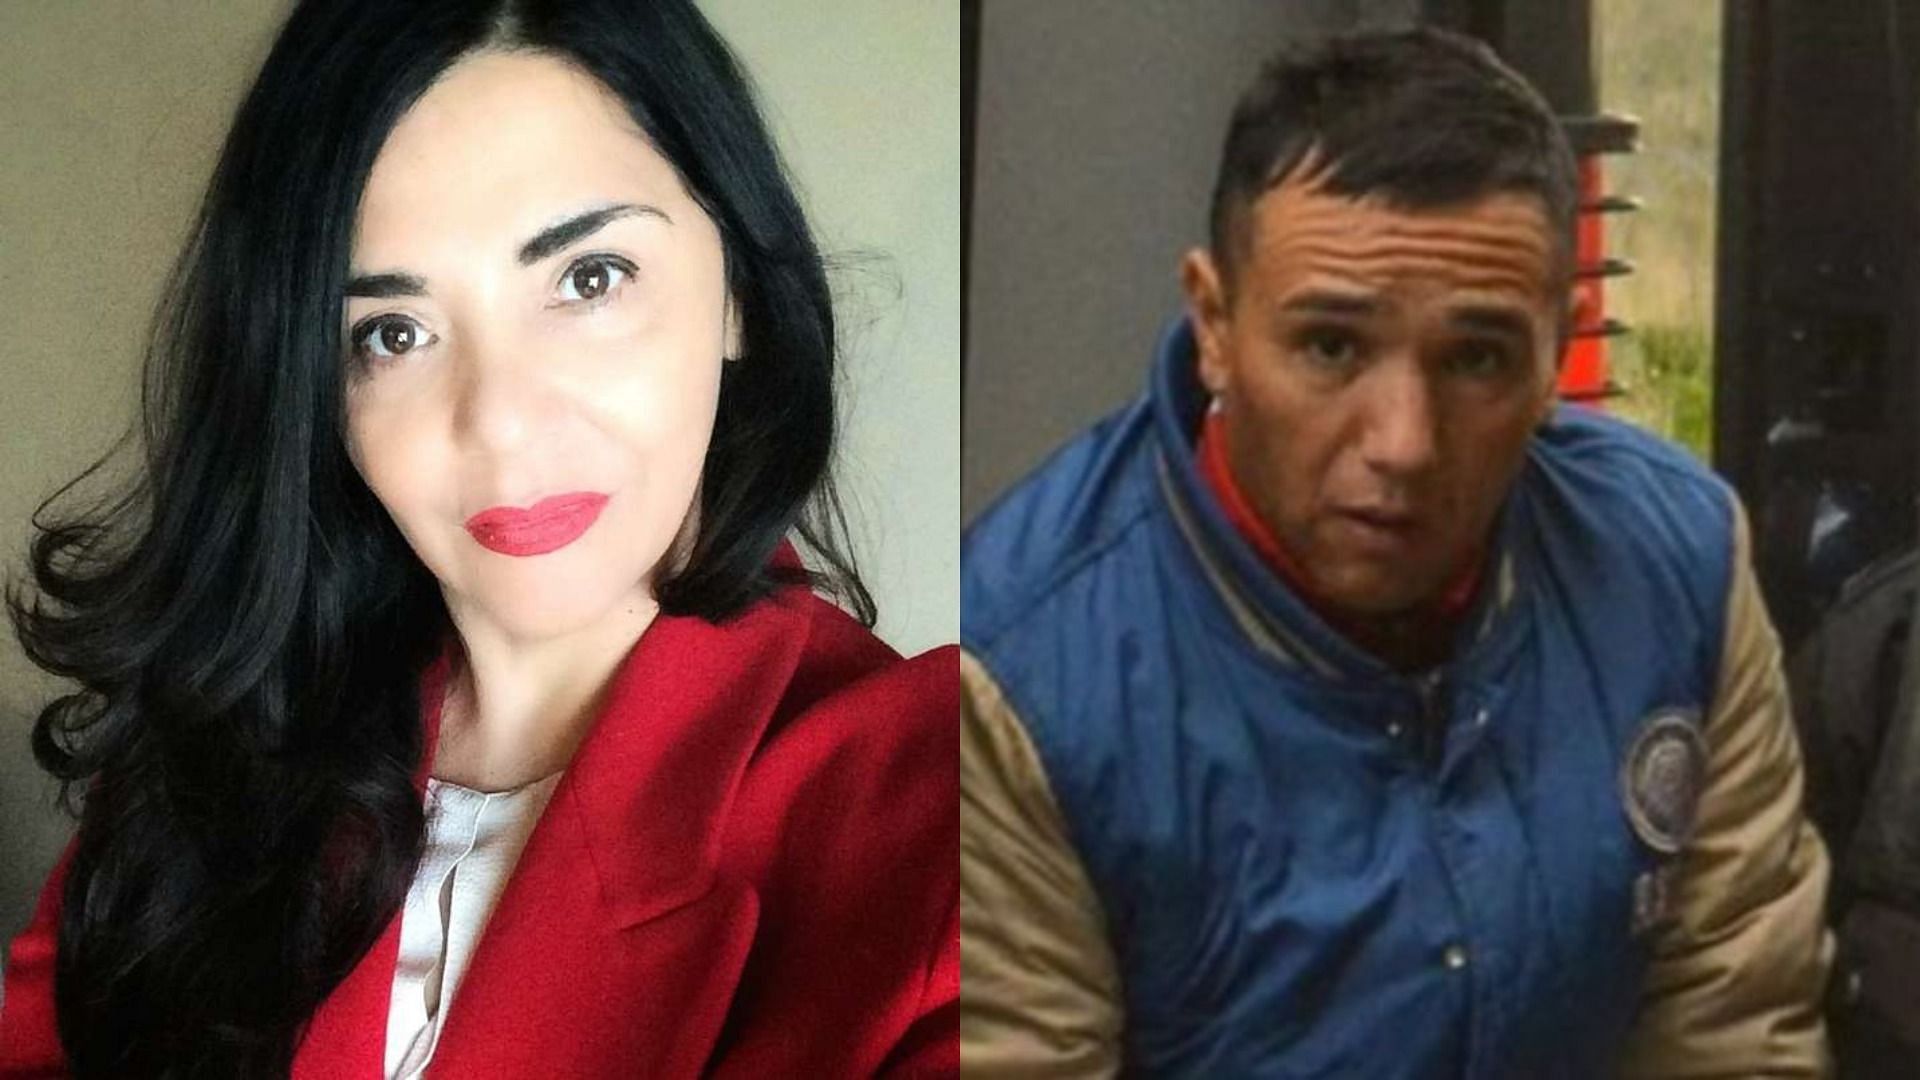 Judge Mariel Suarez was allegedly caught kissing prison inmate Christian Mai Bustos (Image via Twitter)